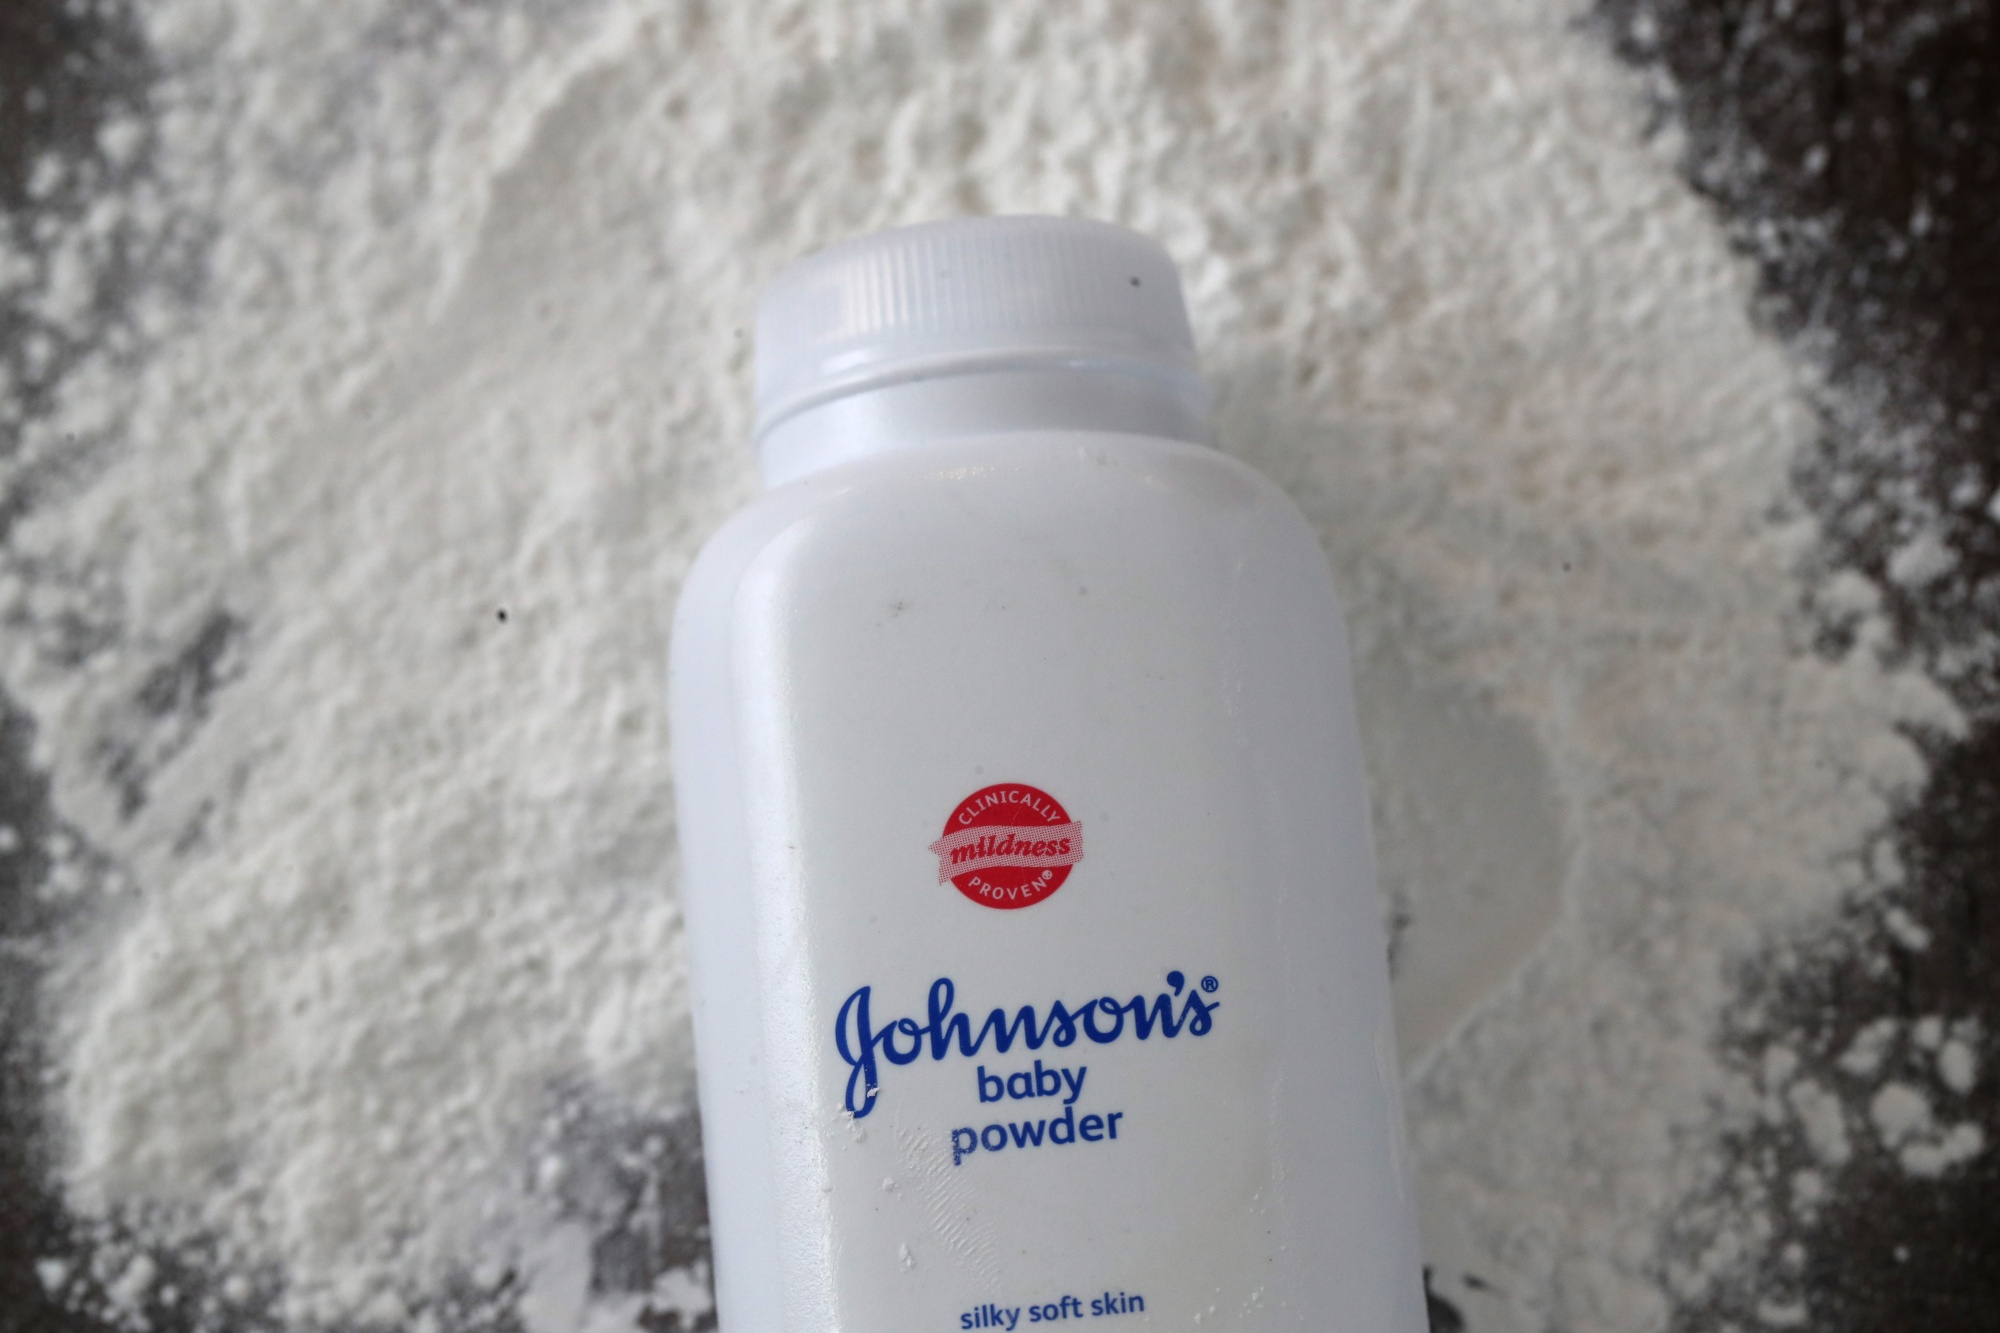 The settlement would avert potential lawsuits alleging that J&amp;J hid any links between the talc in its powder and various cancers.